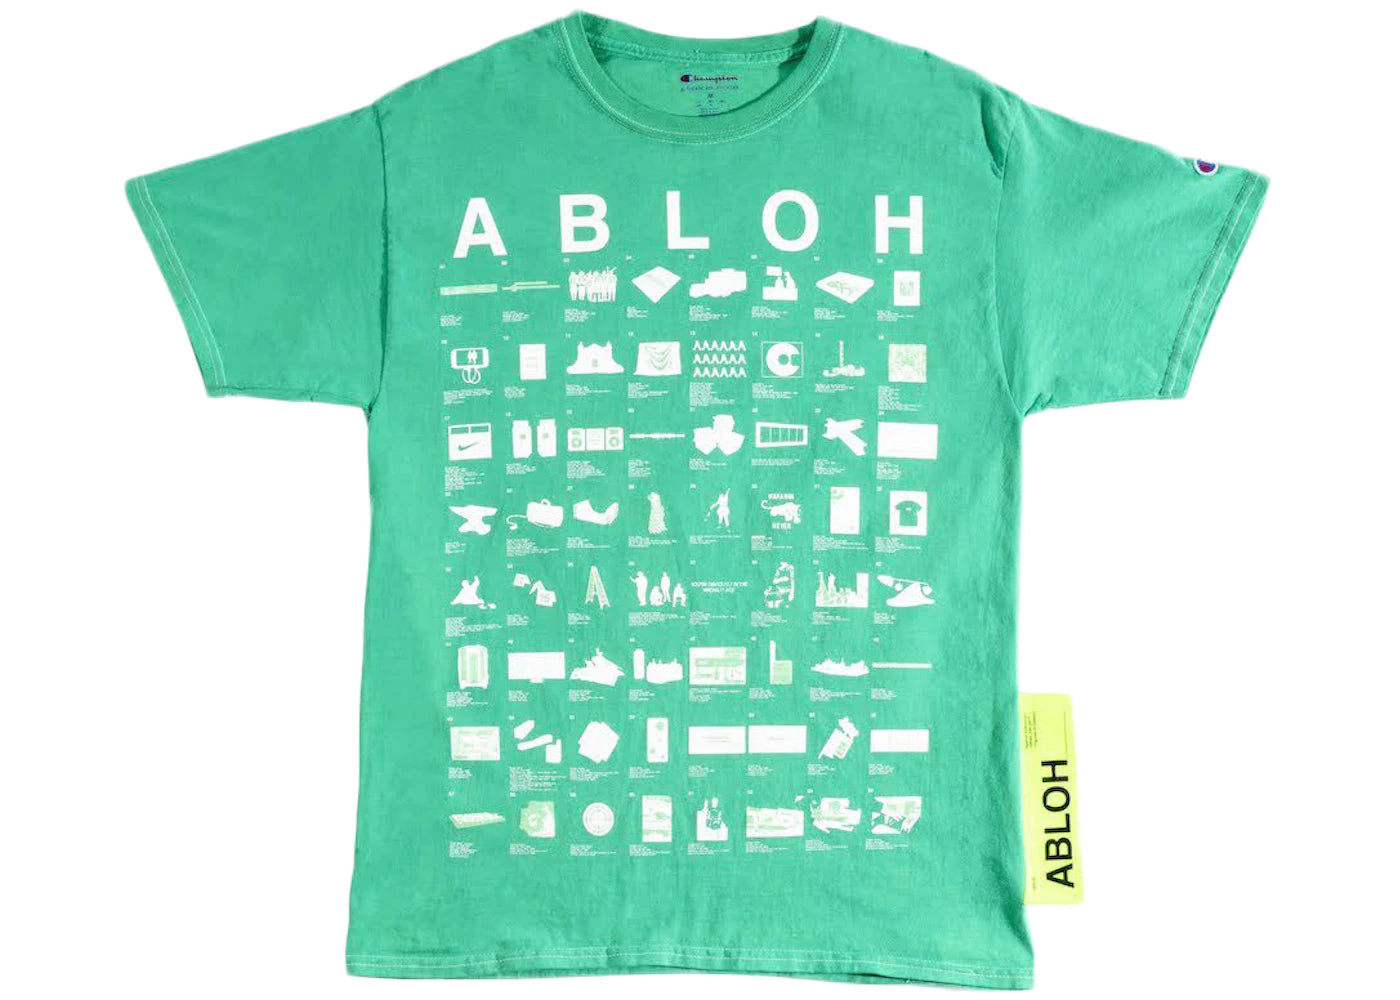 Ica Abloh 2021 collection tee (Green)